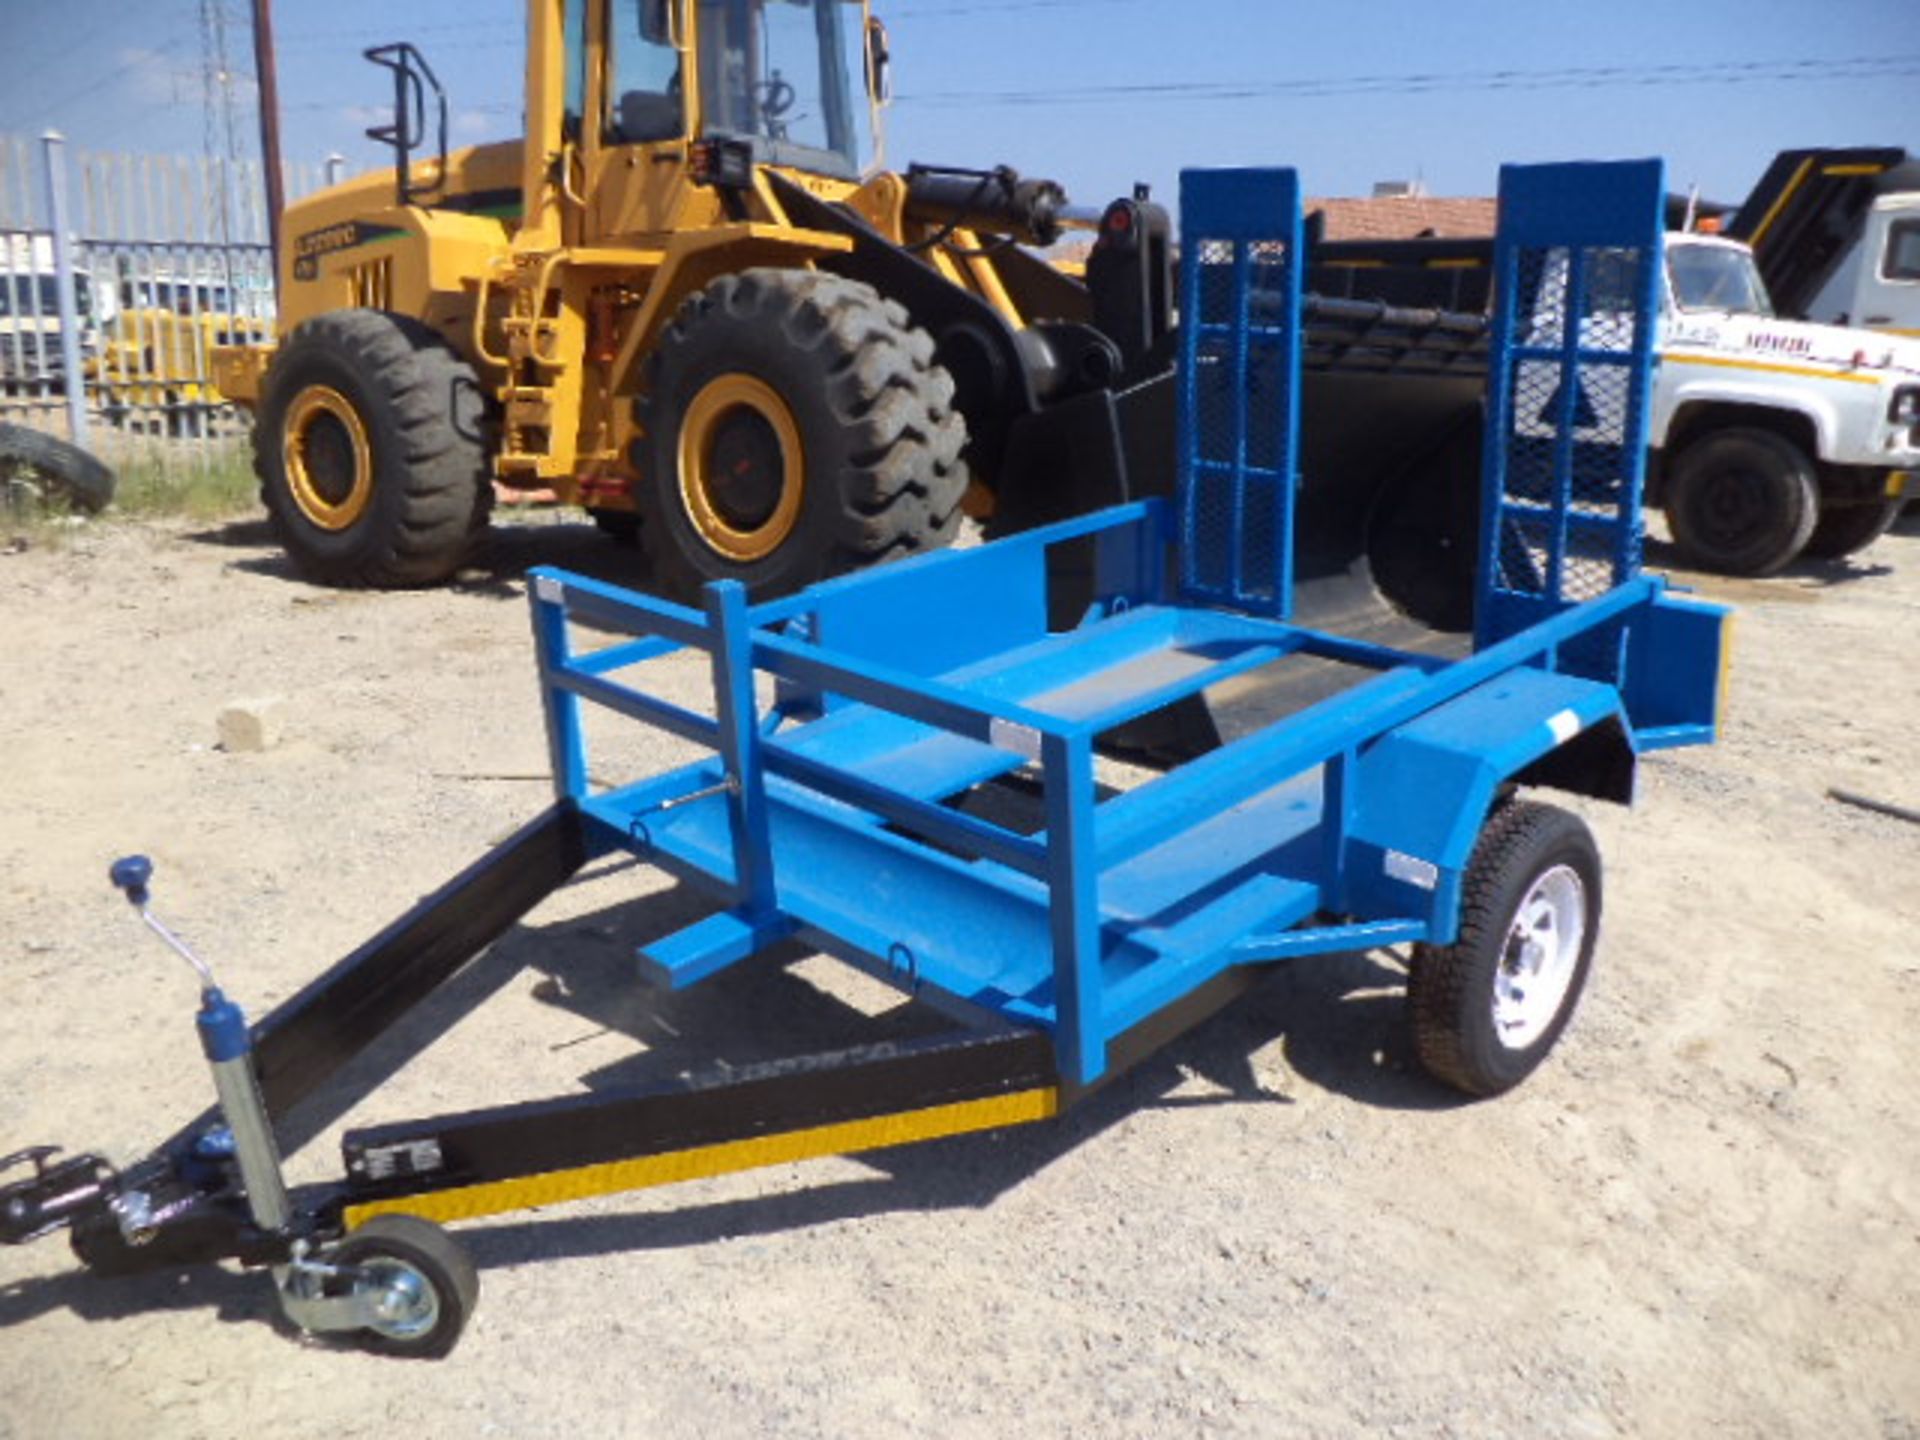 NEW Single Axle Blue Trailer With Ramps (Vin No: AA9B175UBEBTT1323 )(un-registered)